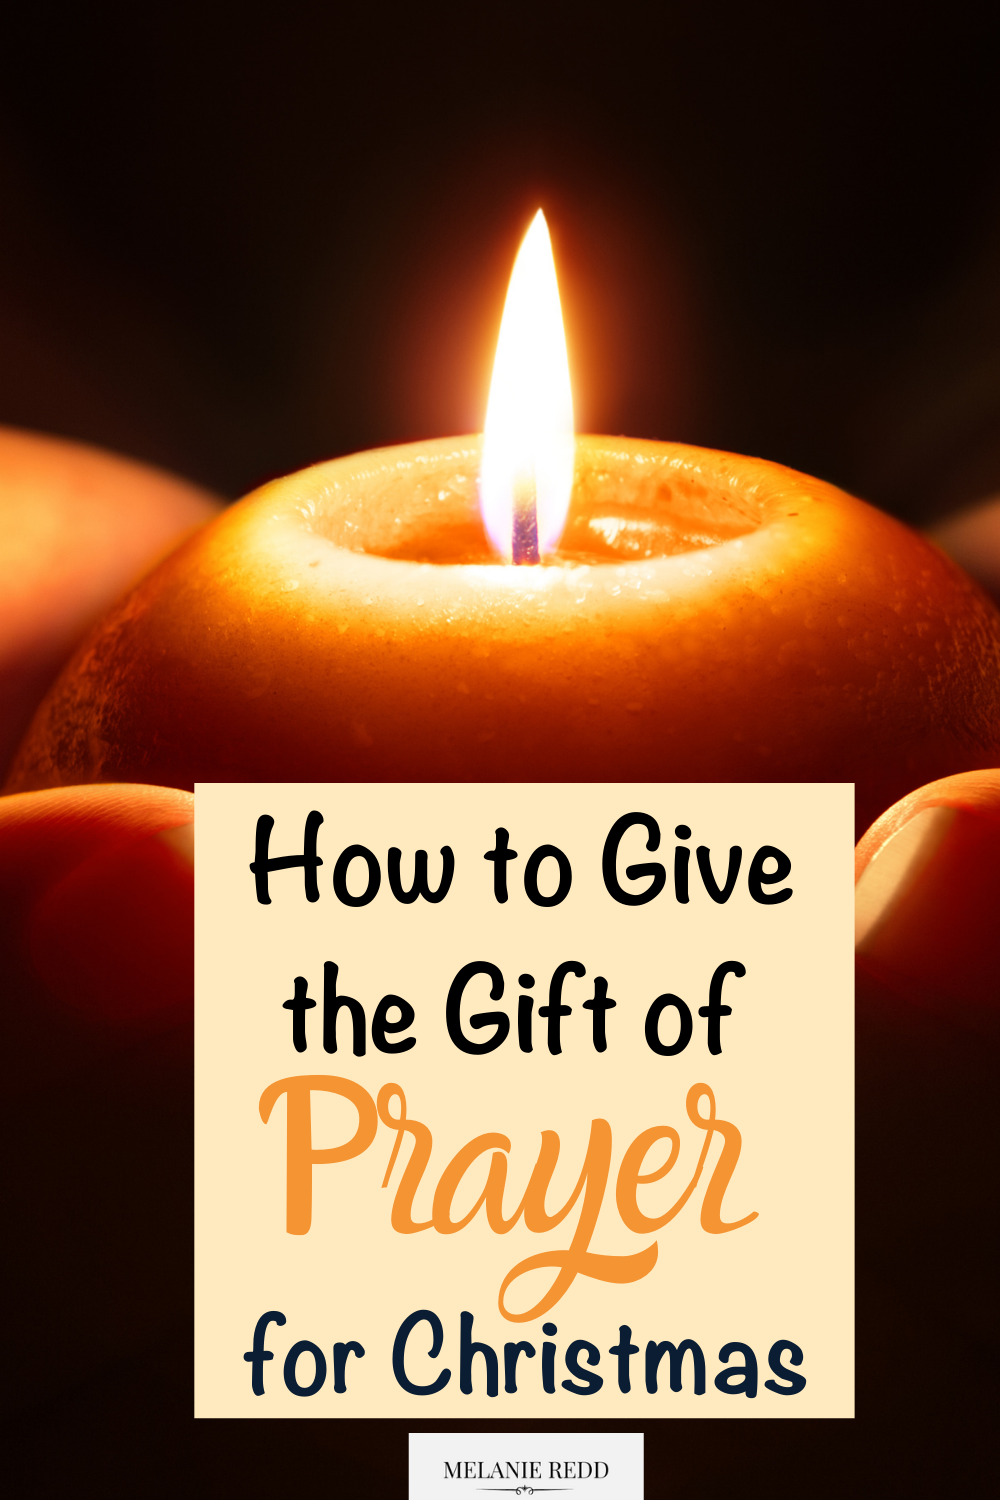 Why not give a gift that comes packaged in the power of God rather than ribbons and bows? Learn how to give the gift of prayer.